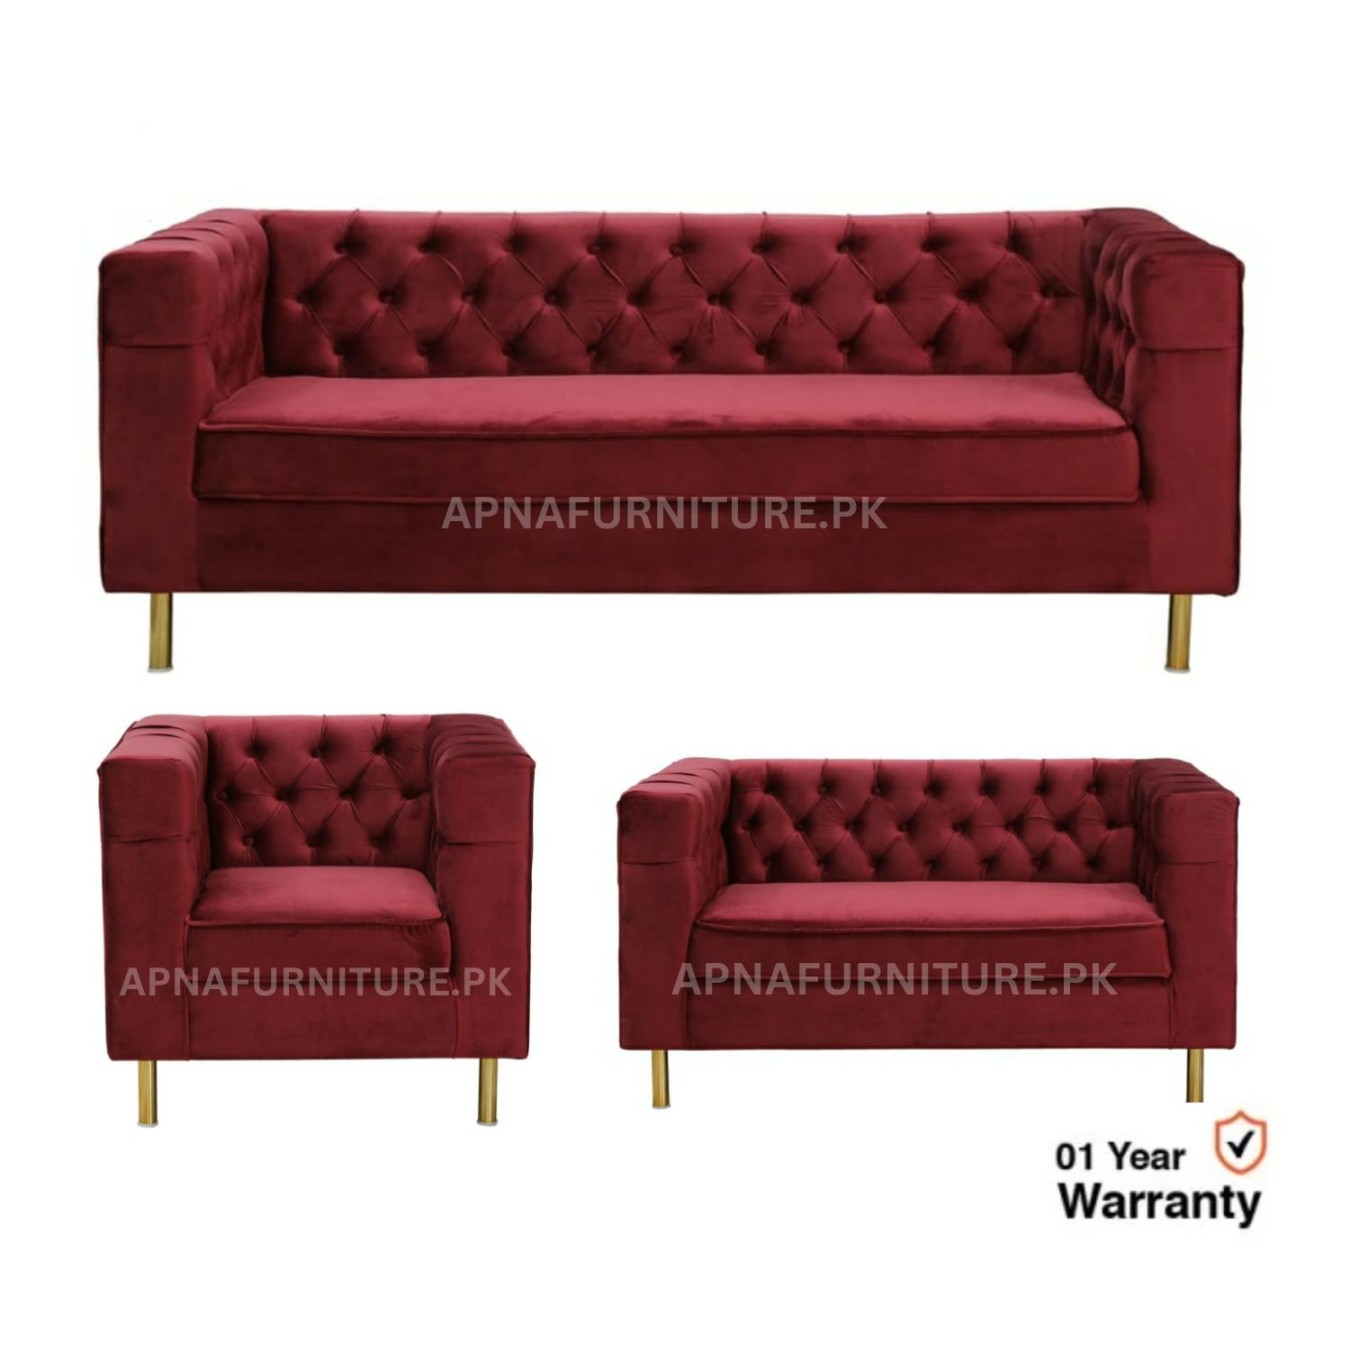 Sofa Sets Available for Sale at Best Price in Pakistan  Buy Now!